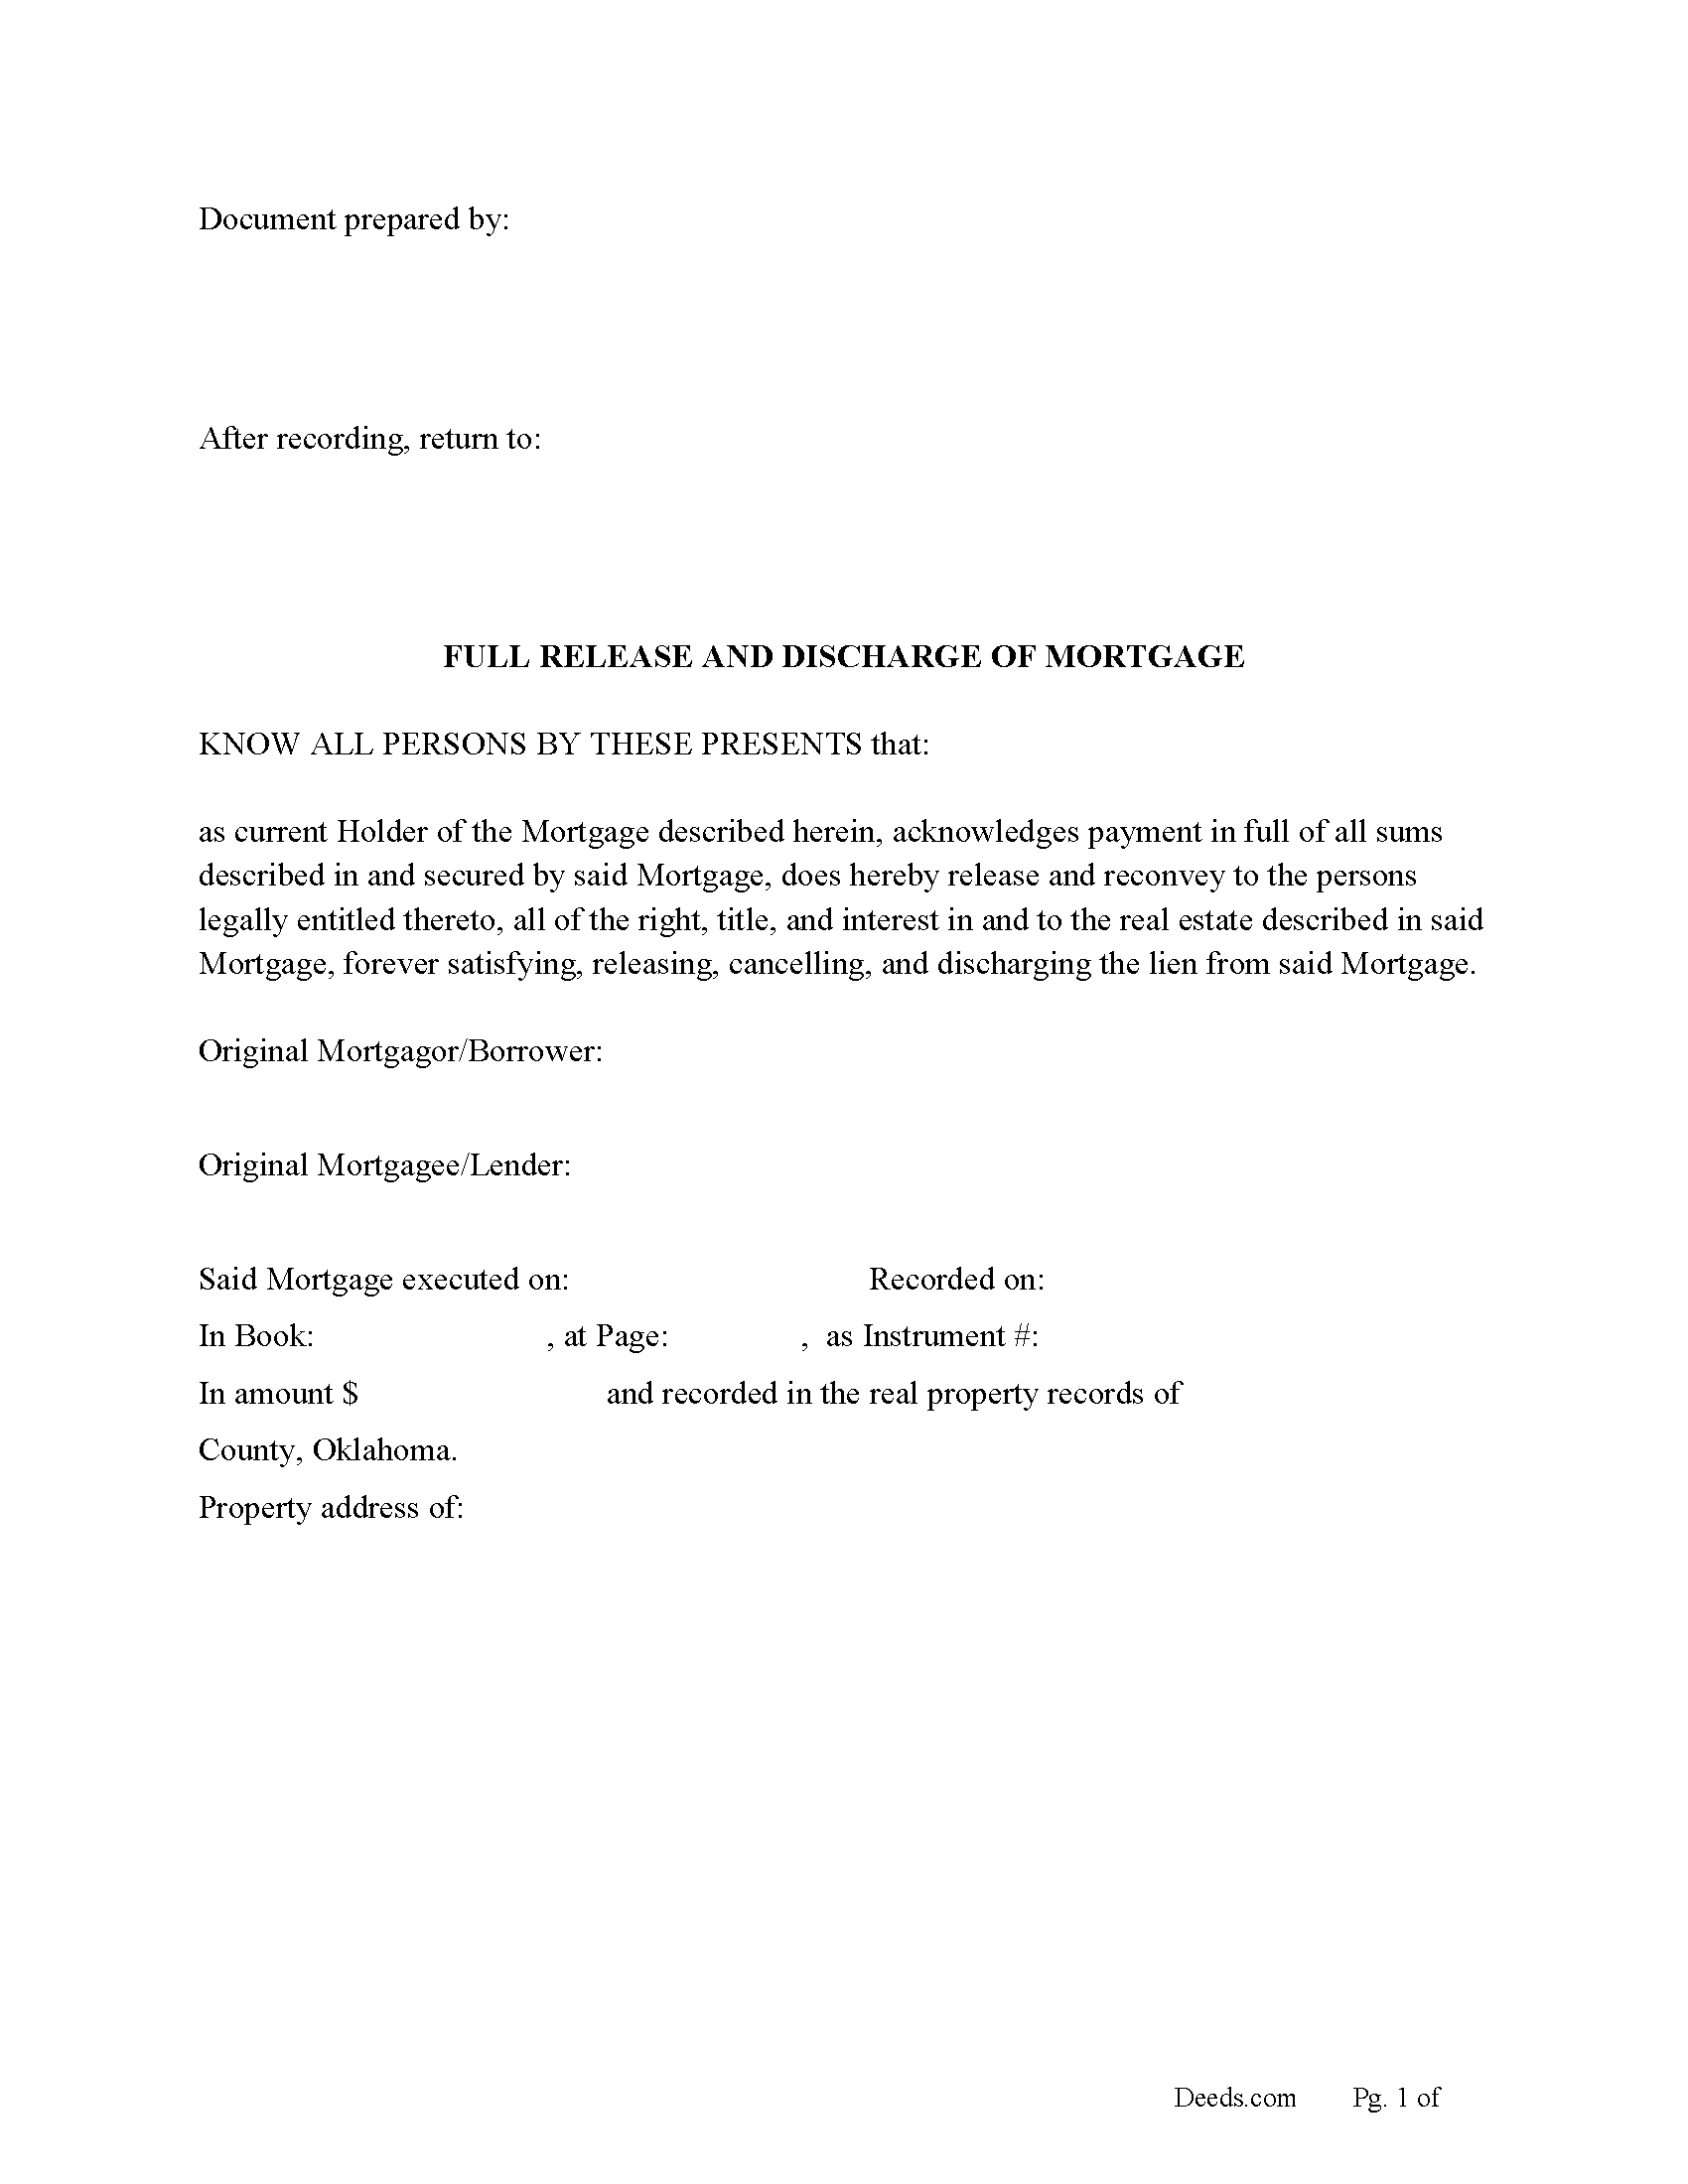 Full Release and Discharge of Mortgage